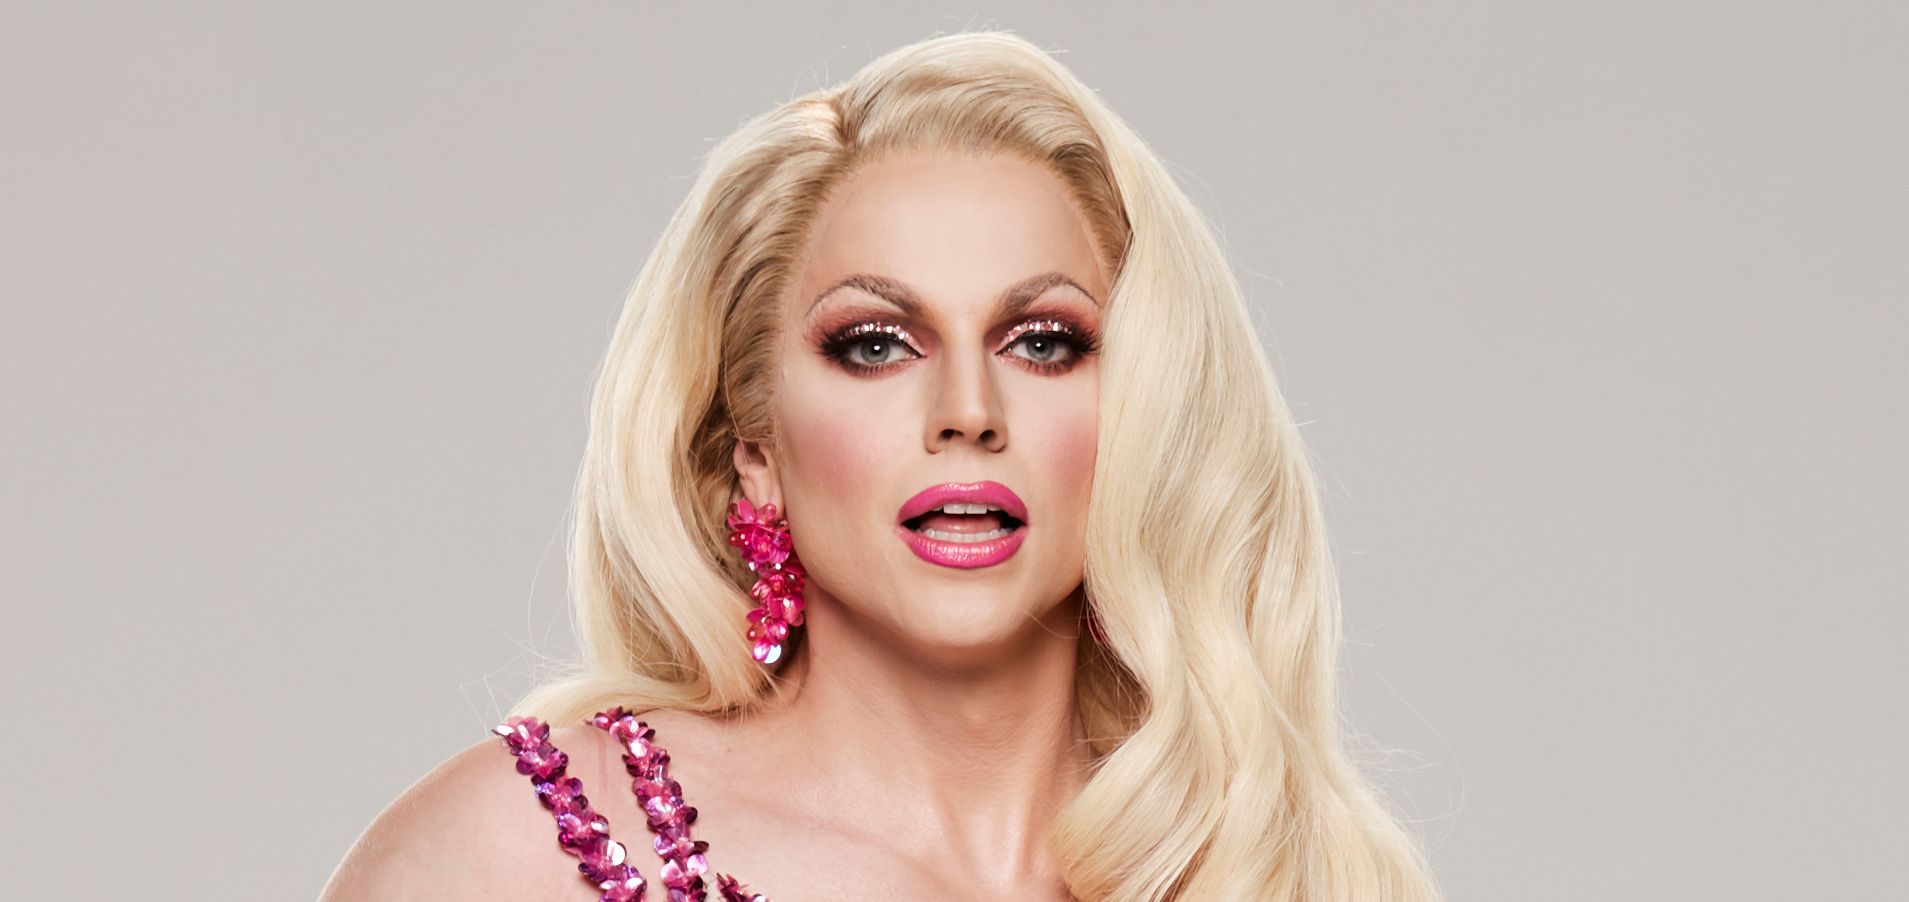 ‘Queer people in the Indigenous community need allyship’: Courtney Act